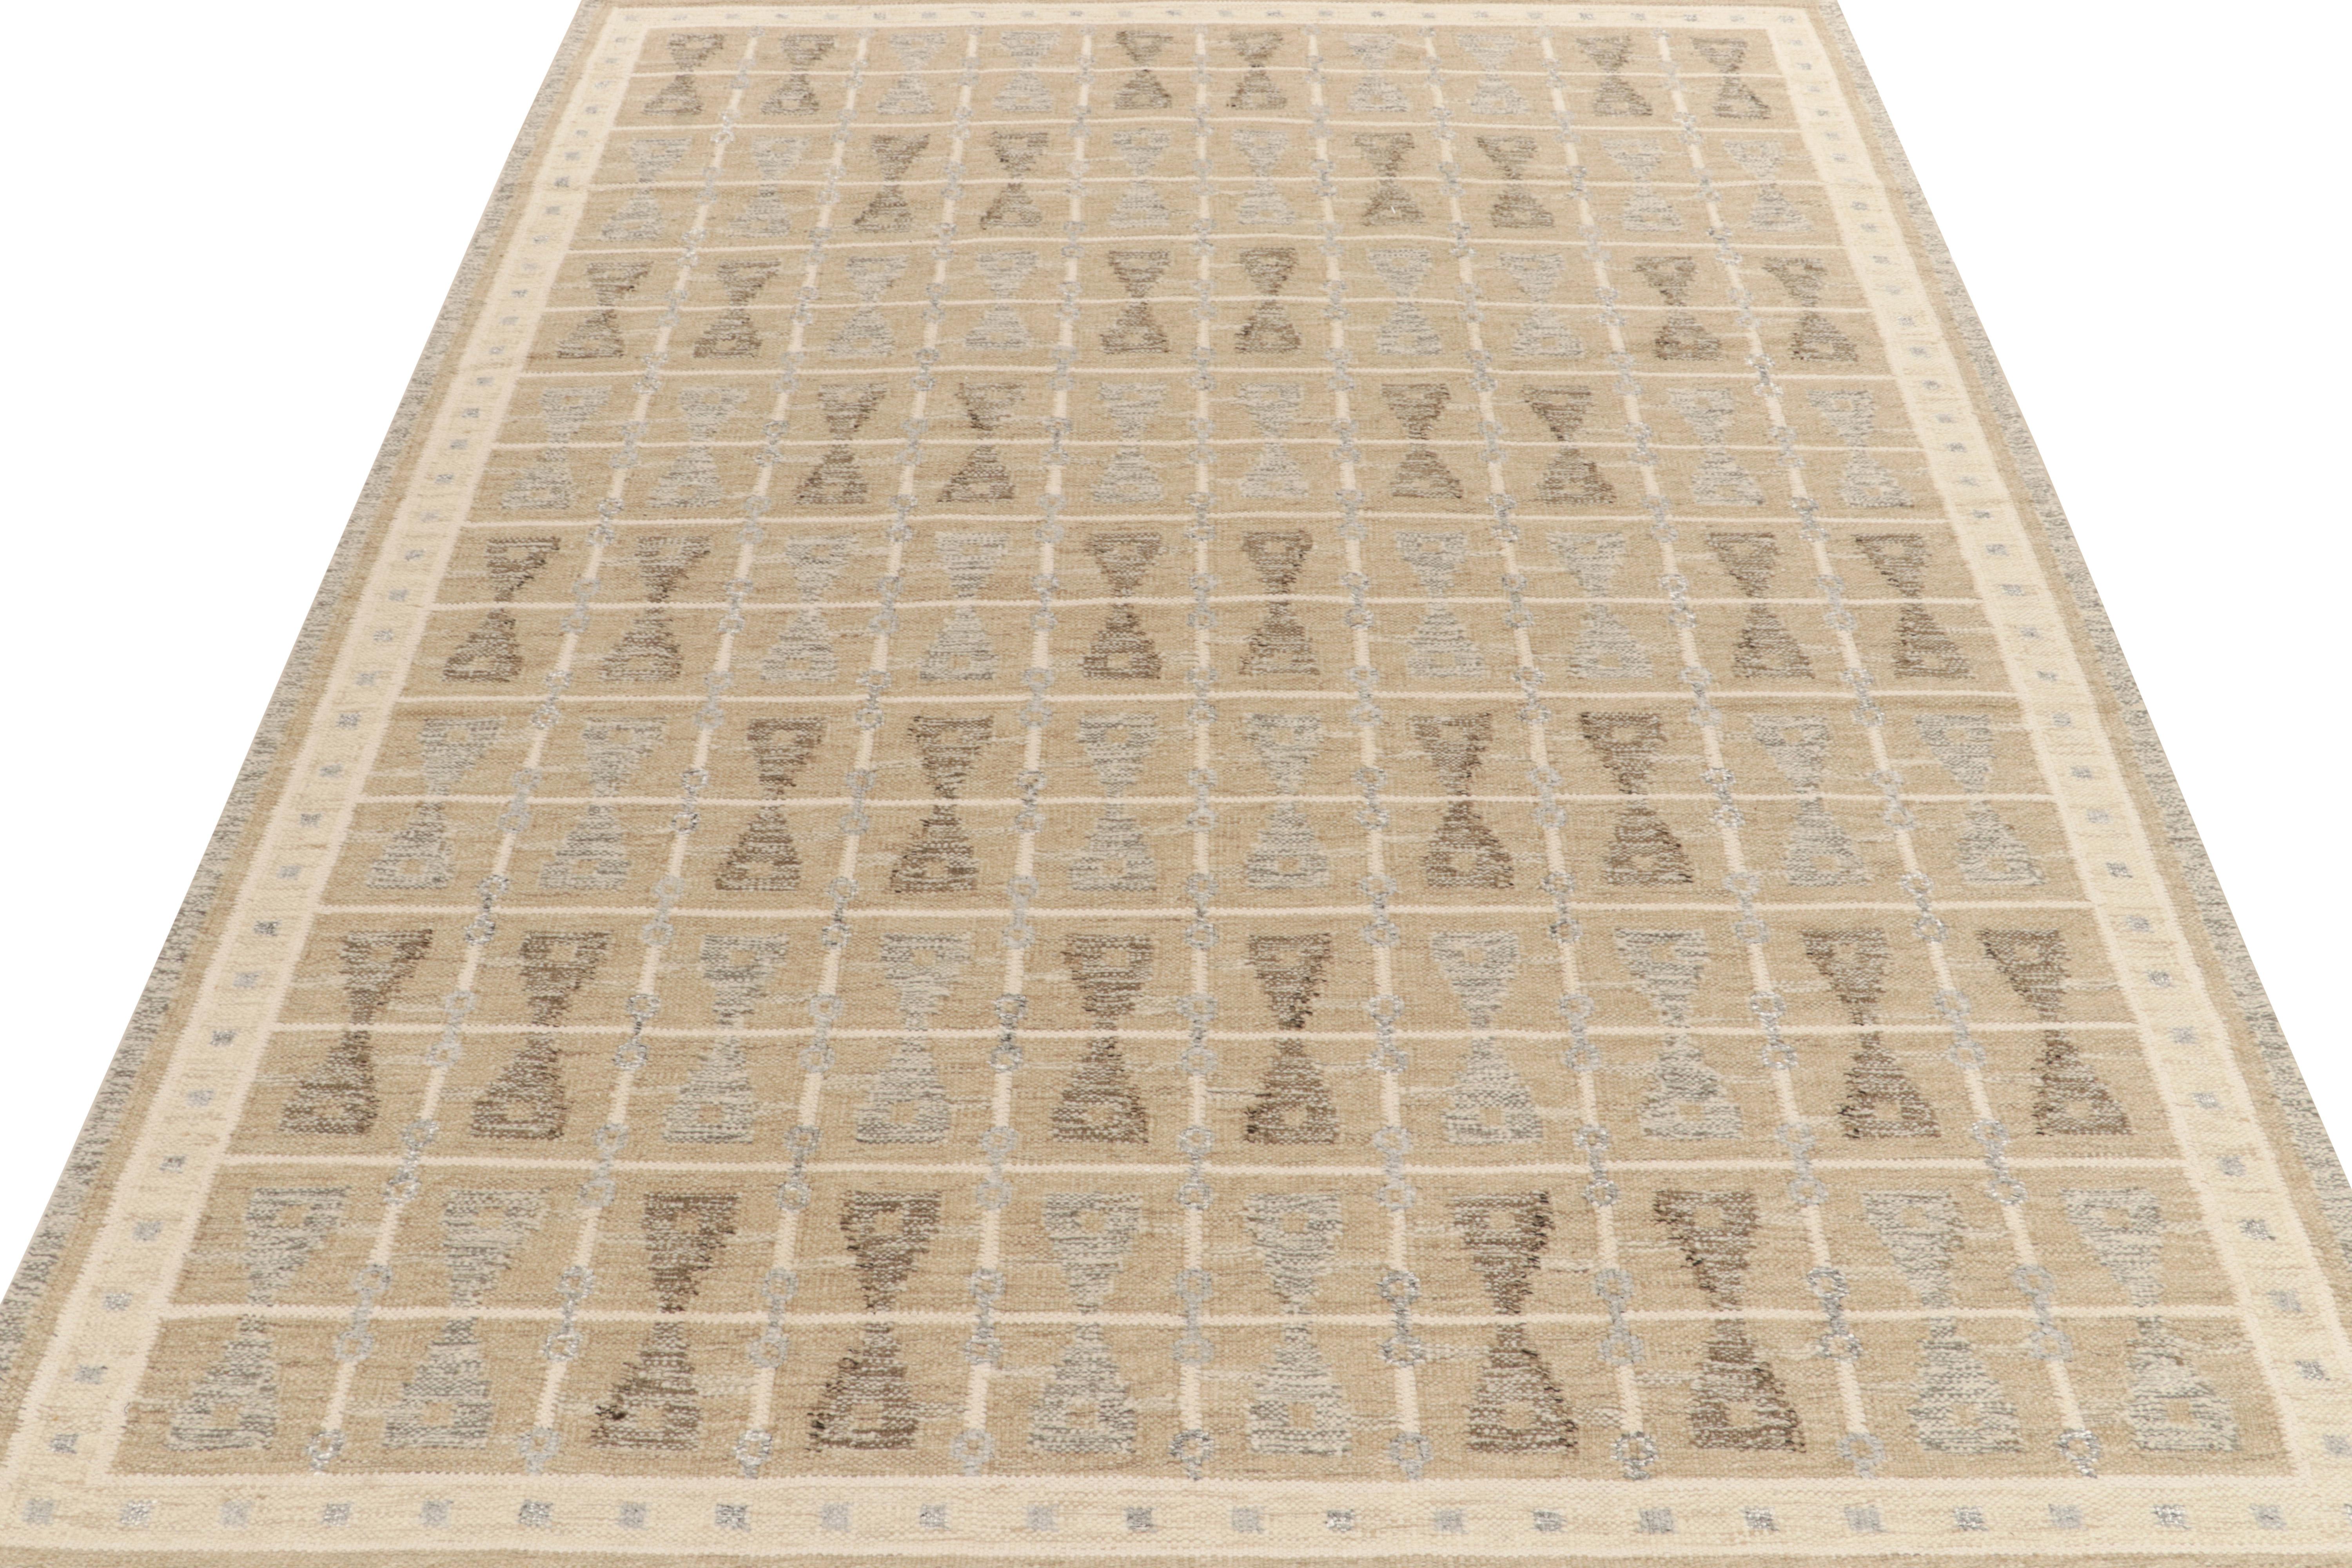 Rug & Kilim’s Scandinavian style kilim from our celebrated, award-winning flat weave texture of the titular collection. This 9x12 rug enjoys the finesse of Swedish design aesthetics with a well-defined geometric pattern relishing a reflective mood